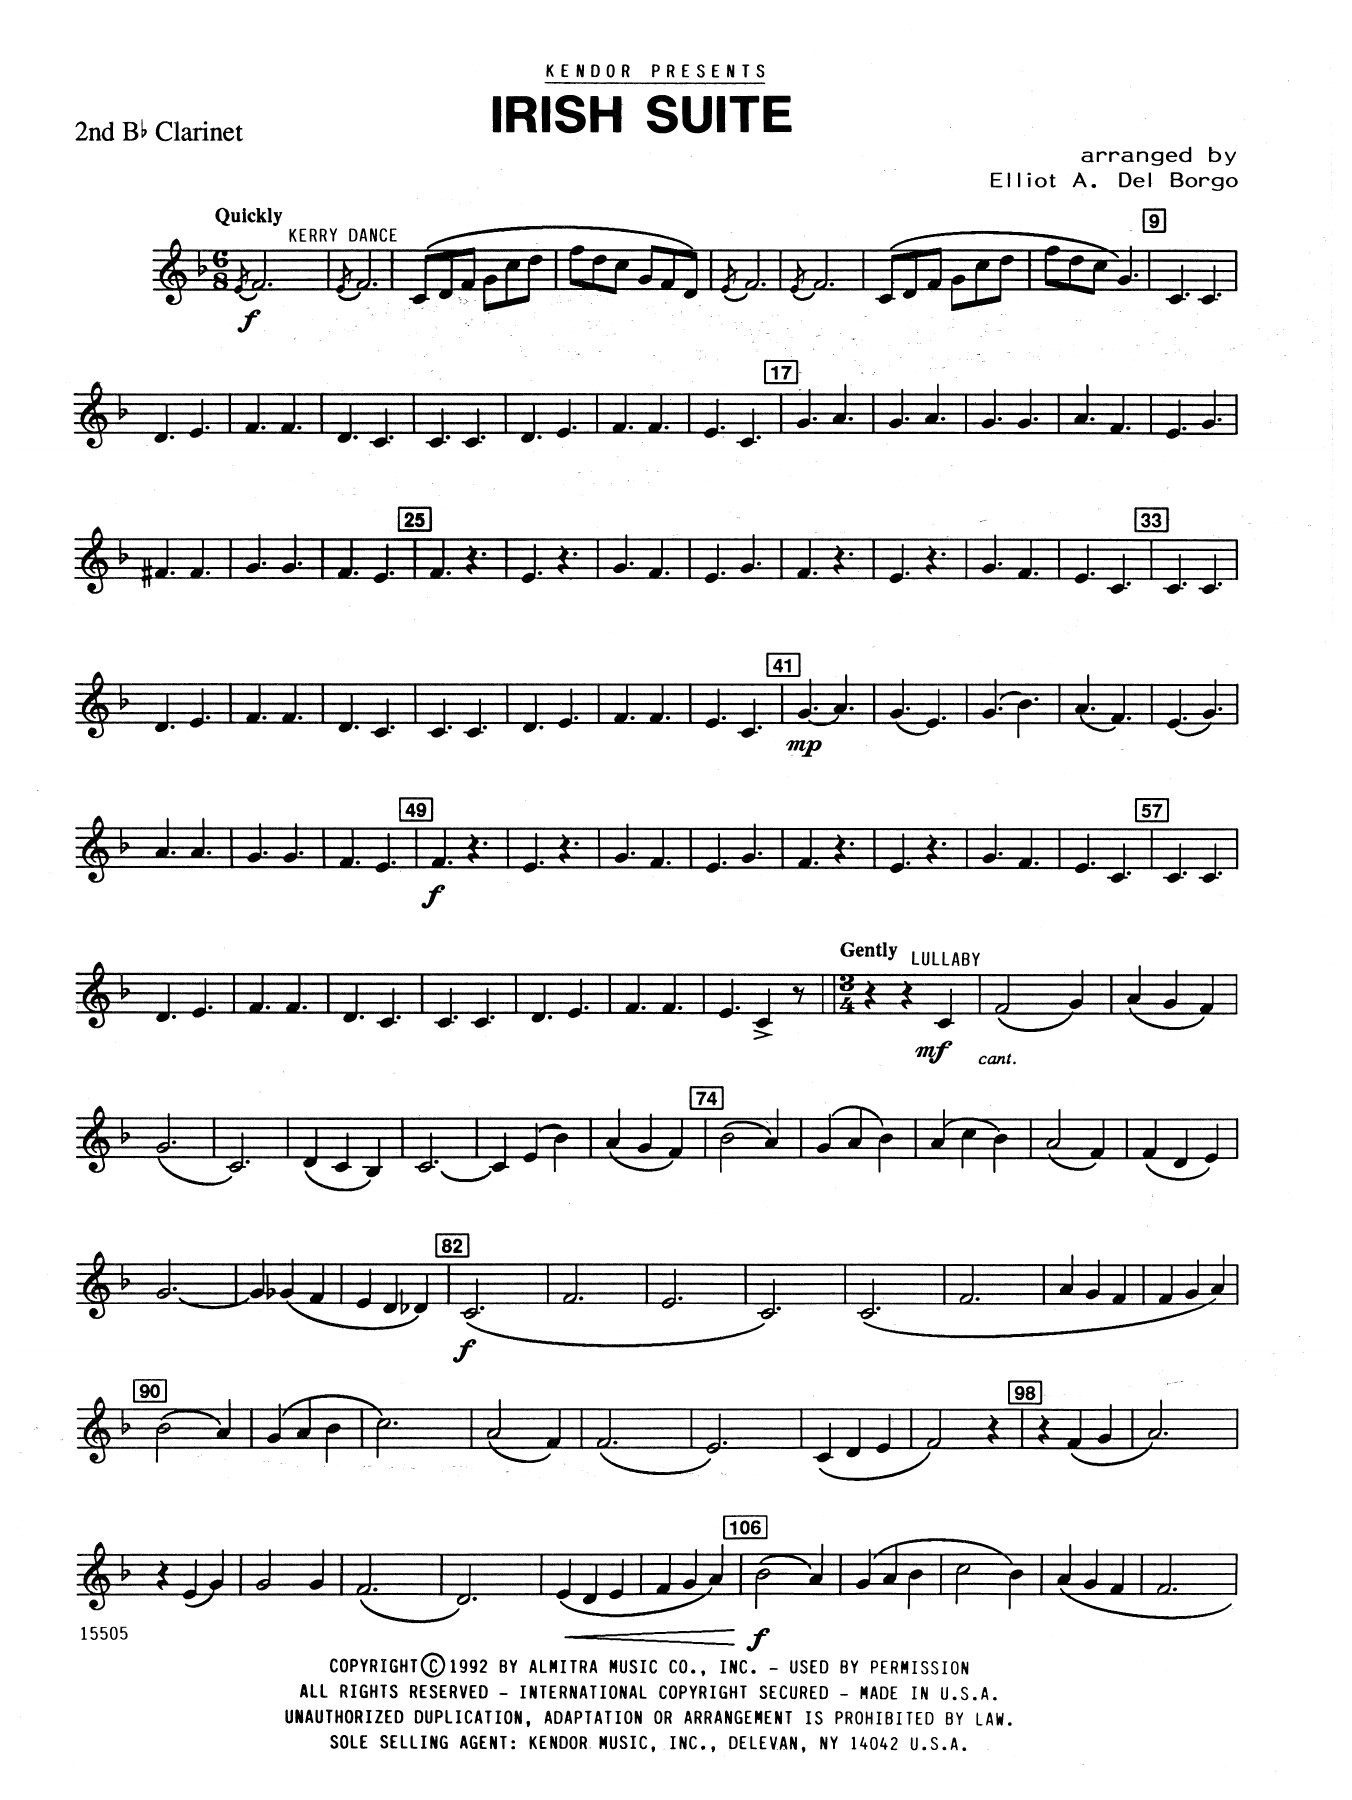 Elliot A. Del Borgo Irish Suite - 2nd Bb Clarinet sheet music notes and chords. Download Printable PDF.